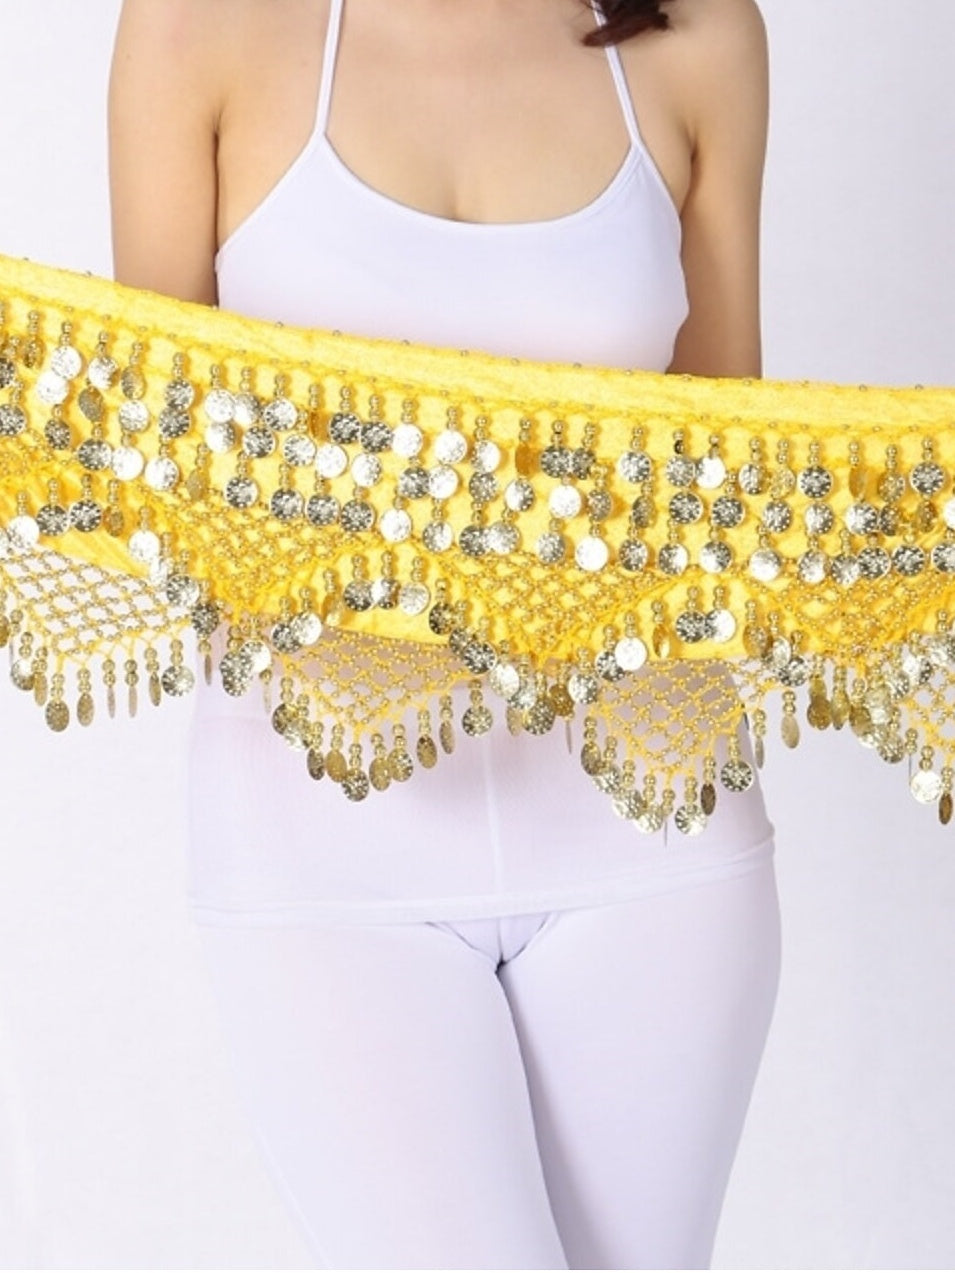 Belly Dance Hip Scarves Women's Performance Polyster Paillette Hip Scarf